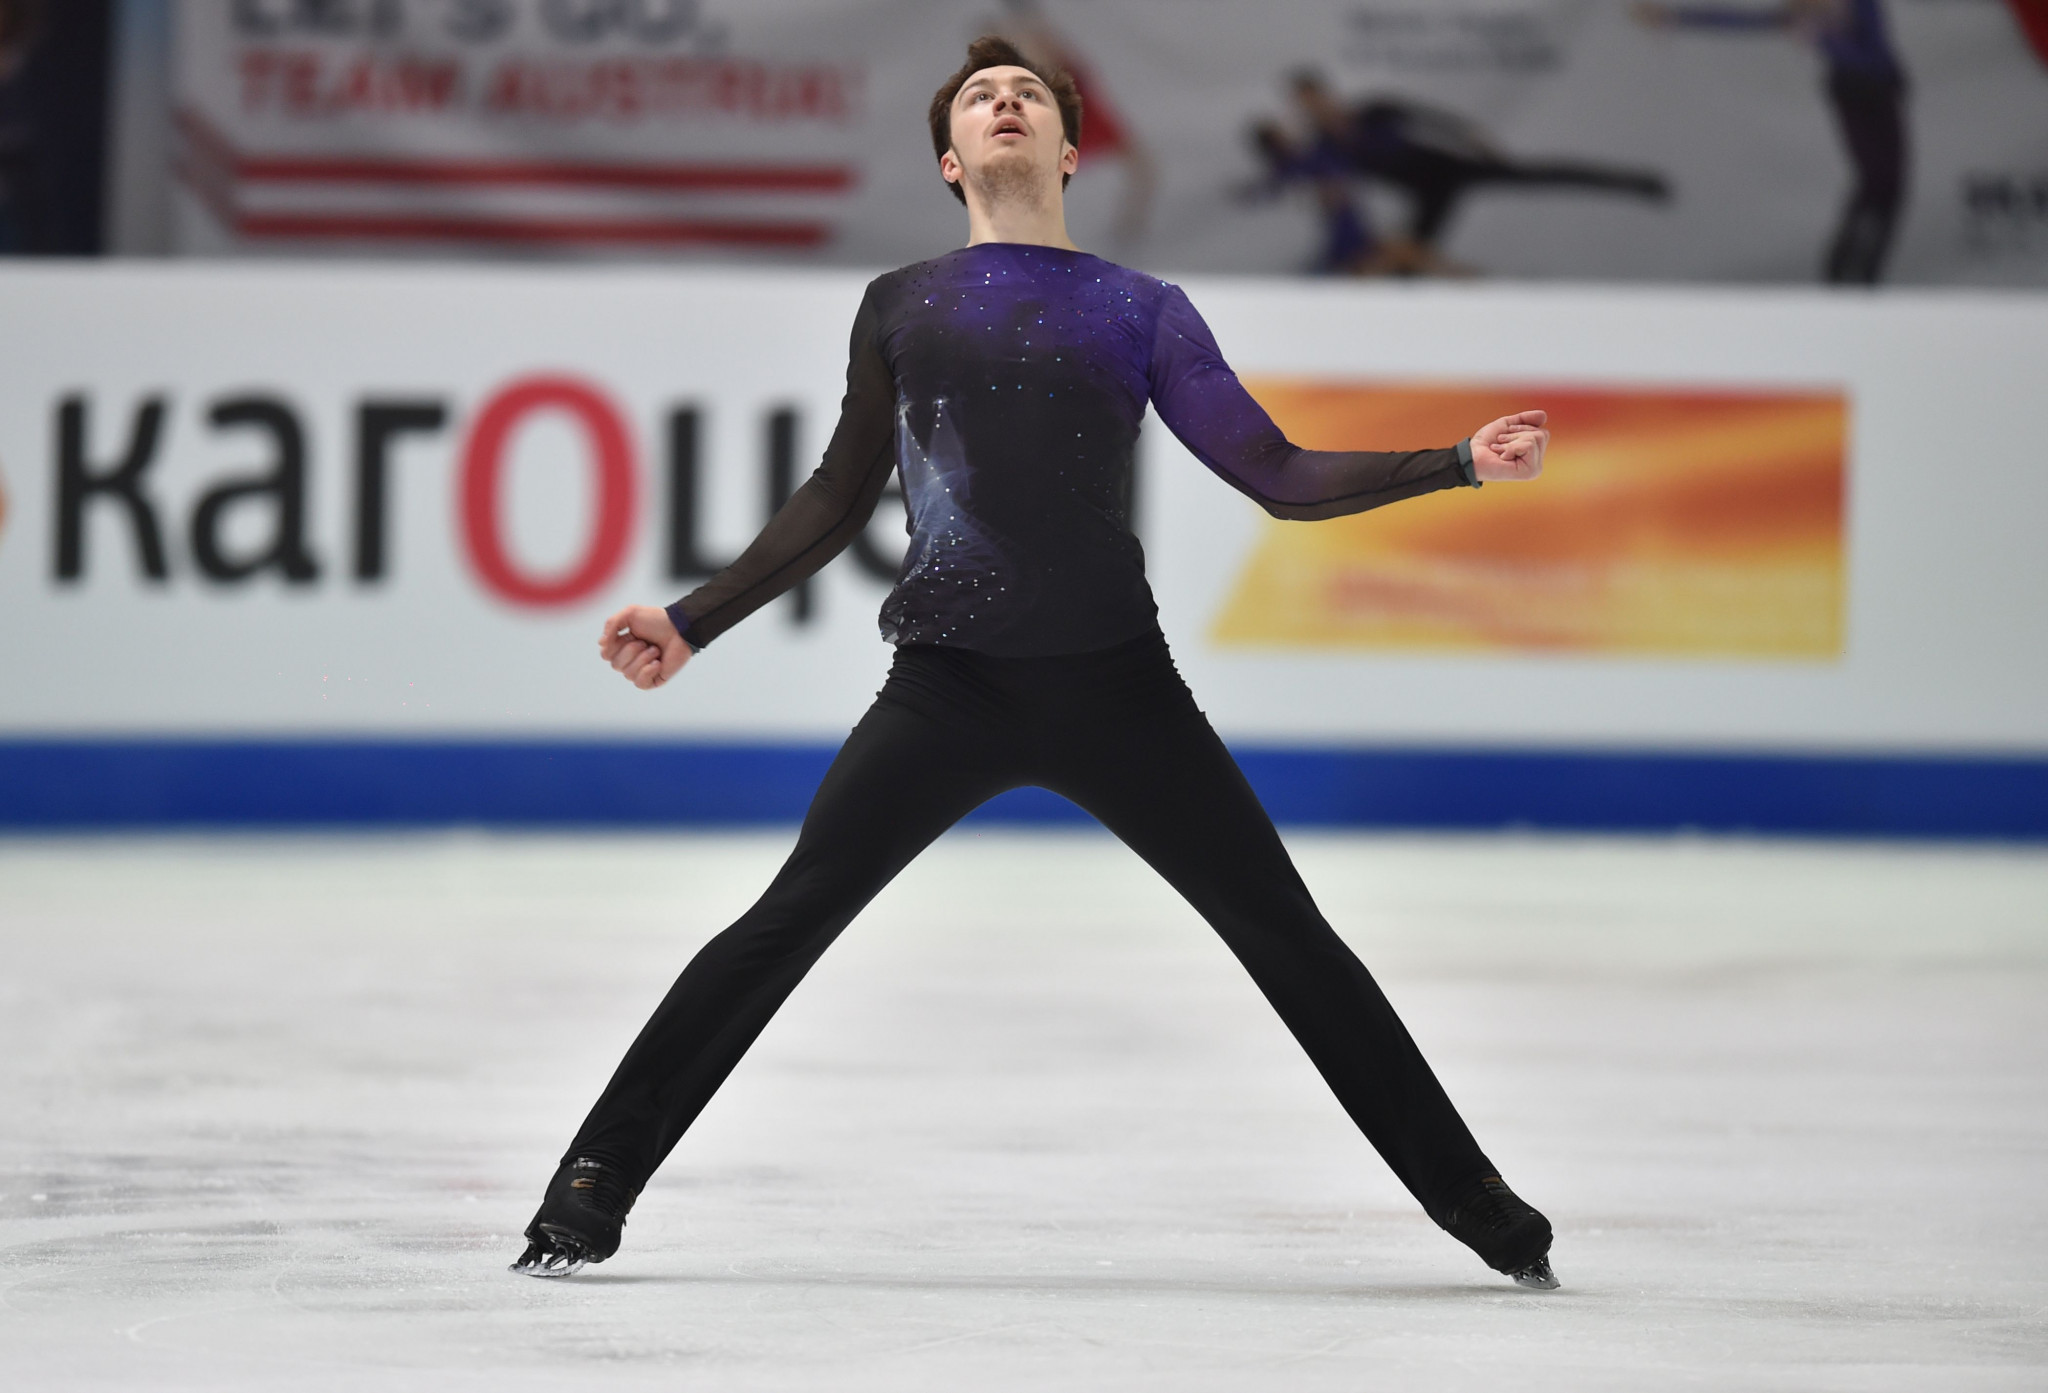 Russia's Dmitri Aliev clinched the gold medal at the ISU European Figure Skating Championships in Graz ©Getty Images